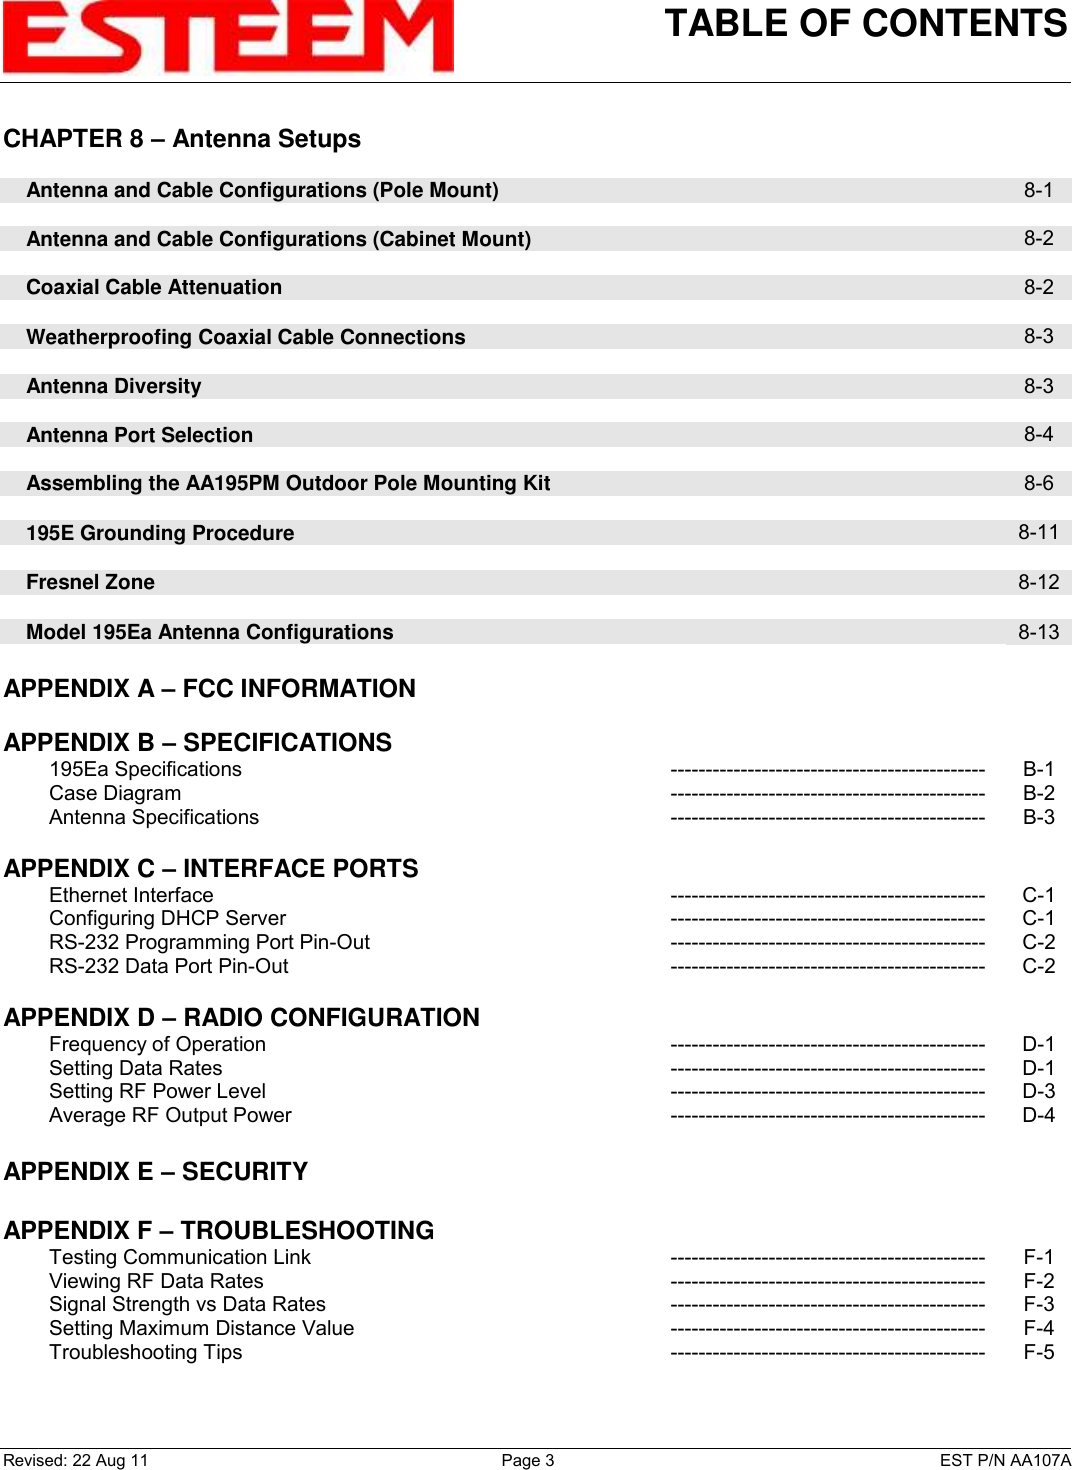 TABLE OF CONTENTS    Revised: 22 Aug 11  Page 3  EST P/N AA107A CHAPTER 8 – Antenna Setups          Antenna and Cable Configurations (Pole Mount)  8-1        Antenna and Cable Configurations (Cabinet Mount)  8-2        Coaxial Cable Attenuation  8-2        Weatherproofing Coaxial Cable Connections  8-3        Antenna Diversity  8-3        Antenna Port Selection  8-4        Assembling the AA195PM Outdoor Pole Mounting Kit  8-6        195E Grounding Procedure  8-11        Fresnel Zone   8-12        Model 195Ea Antenna Configurations   8-13    APPENDIX A – FCC INFORMATION      APPENDIX B – SPECIFICATIONS           195Ea Specifications --------------------------------------------- B-1         Case Diagram --------------------------------------------- B-2         Antenna Specifications --------------------------------------------- B-3    APPENDIX C – INTERFACE PORTS           Ethernet Interface --------------------------------------------- C-1         Configuring DHCP Server --------------------------------------------- C-1         RS-232 Programming Port Pin-Out --------------------------------------------- C-2         RS-232 Data Port Pin-Out --------------------------------------------- C-2    APPENDIX D – RADIO CONFIGURATION           Frequency of Operation --------------------------------------------- D-1         Setting Data Rates --------------------------------------------- D-1         Setting RF Power Level --------------------------------------------- D-3         Average RF Output Power --------------------------------------------- D-4    APPENDIX E – SECURITY      APPENDIX F – TROUBLESHOOTING           Testing Communication Link --------------------------------------------- F-1         Viewing RF Data Rates --------------------------------------------- F-2         Signal Strength vs Data Rates --------------------------------------------- F-3         Setting Maximum Distance Value --------------------------------------------- F-4         Troubleshooting Tips --------------------------------------------- F-5  